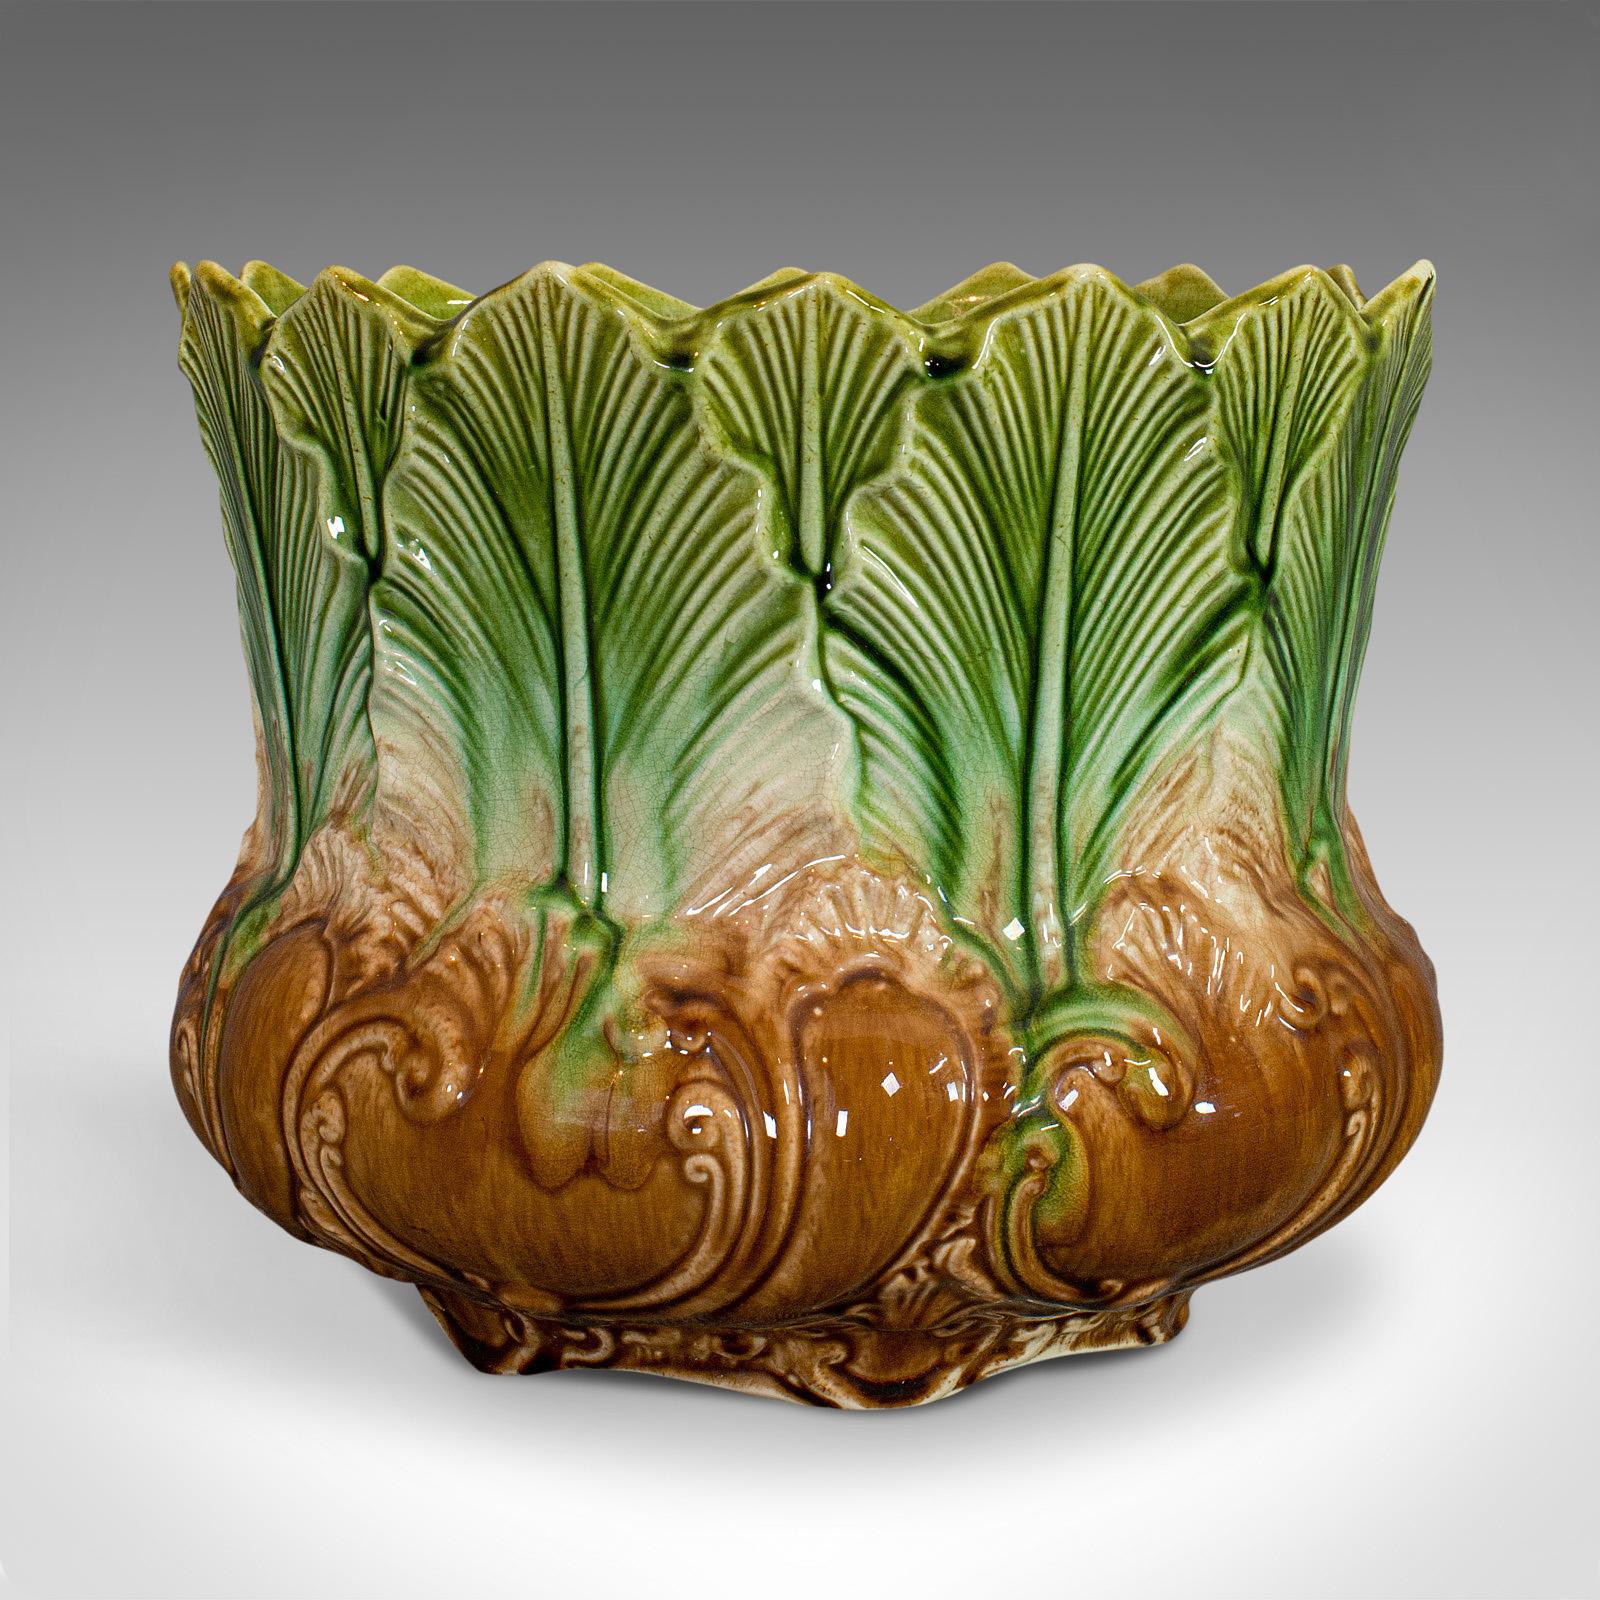 This is an antique planter. An English, Majolica glaze New Leaf jardinière in Art Nouveau taste, dating to the late Victorian period, circa 1900.

Eye-catching, Art Nouveau decorative planter
Displays a desirable aged patina
Verdant green and